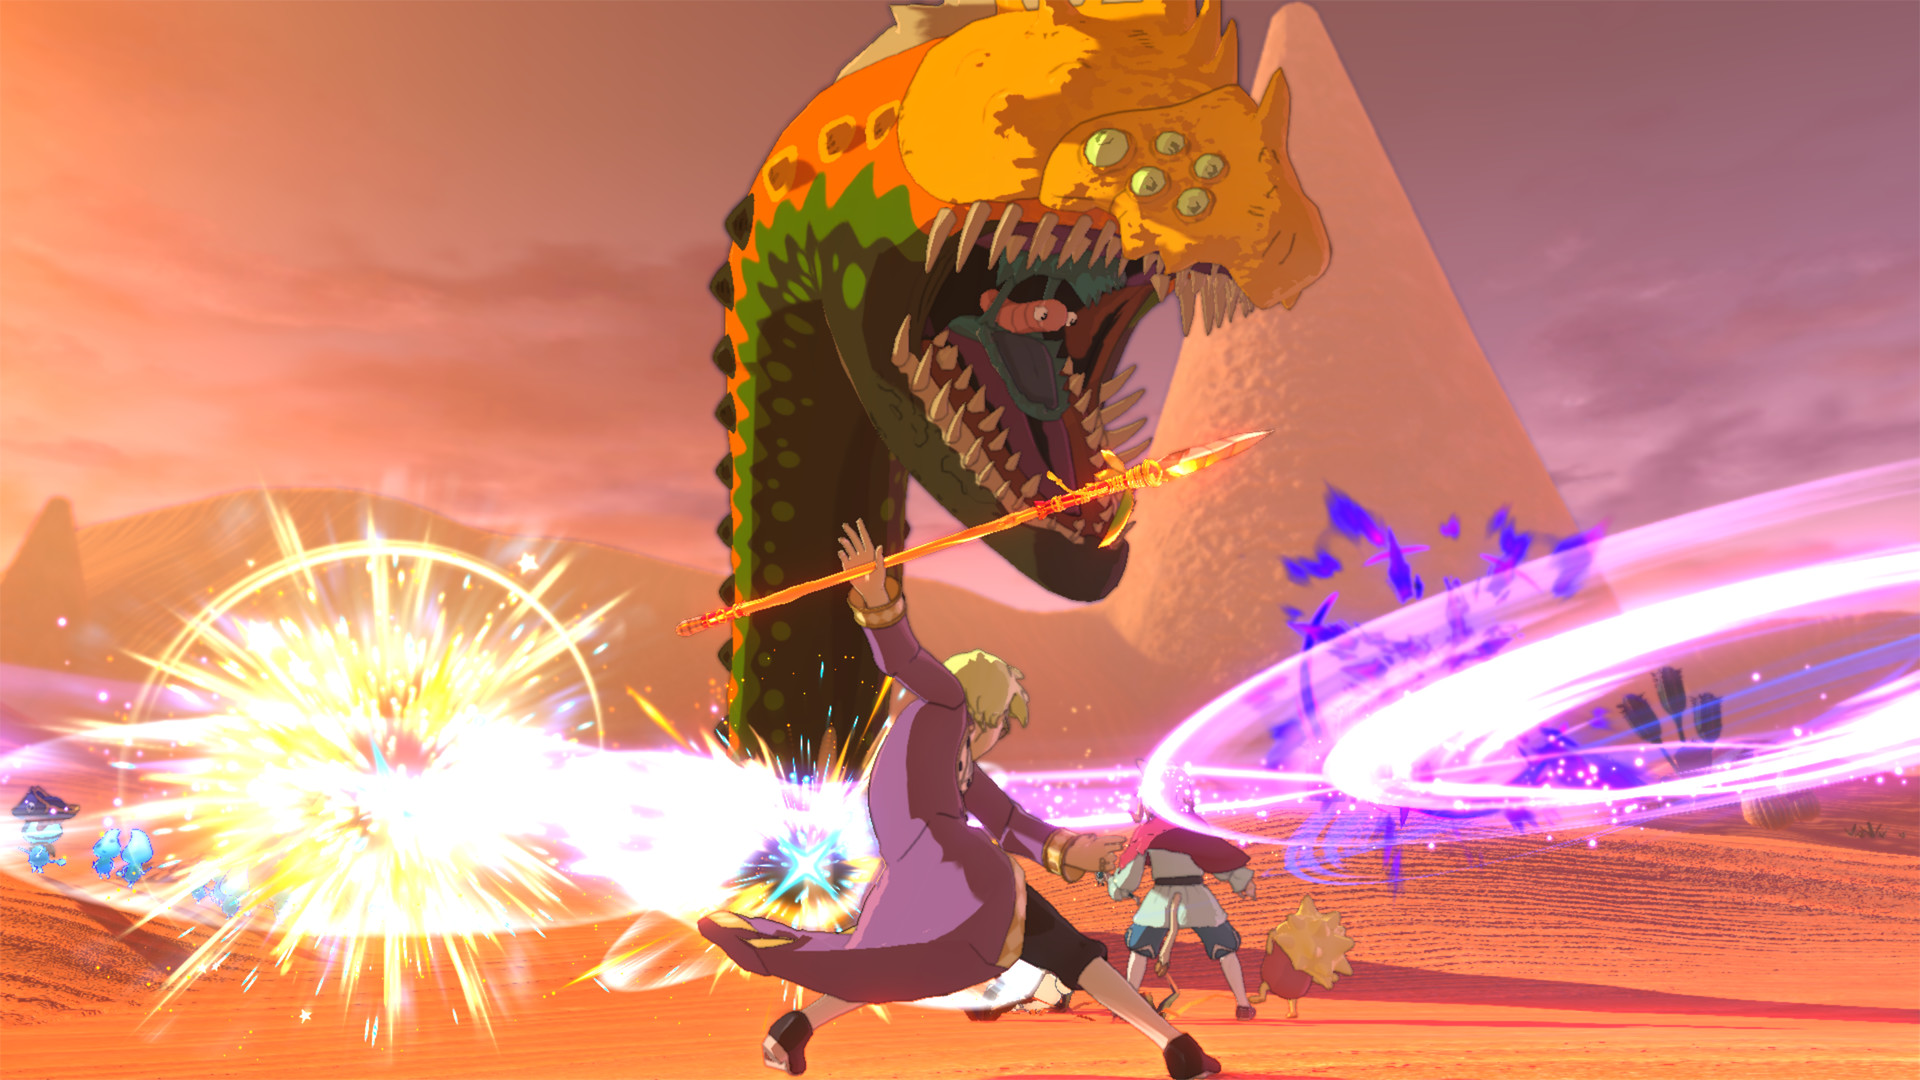 Best anime games: Ni no Kuni 2 - Revenant Kingdom. Image shows characters fighting a large sand worm that has emerged from the sand.